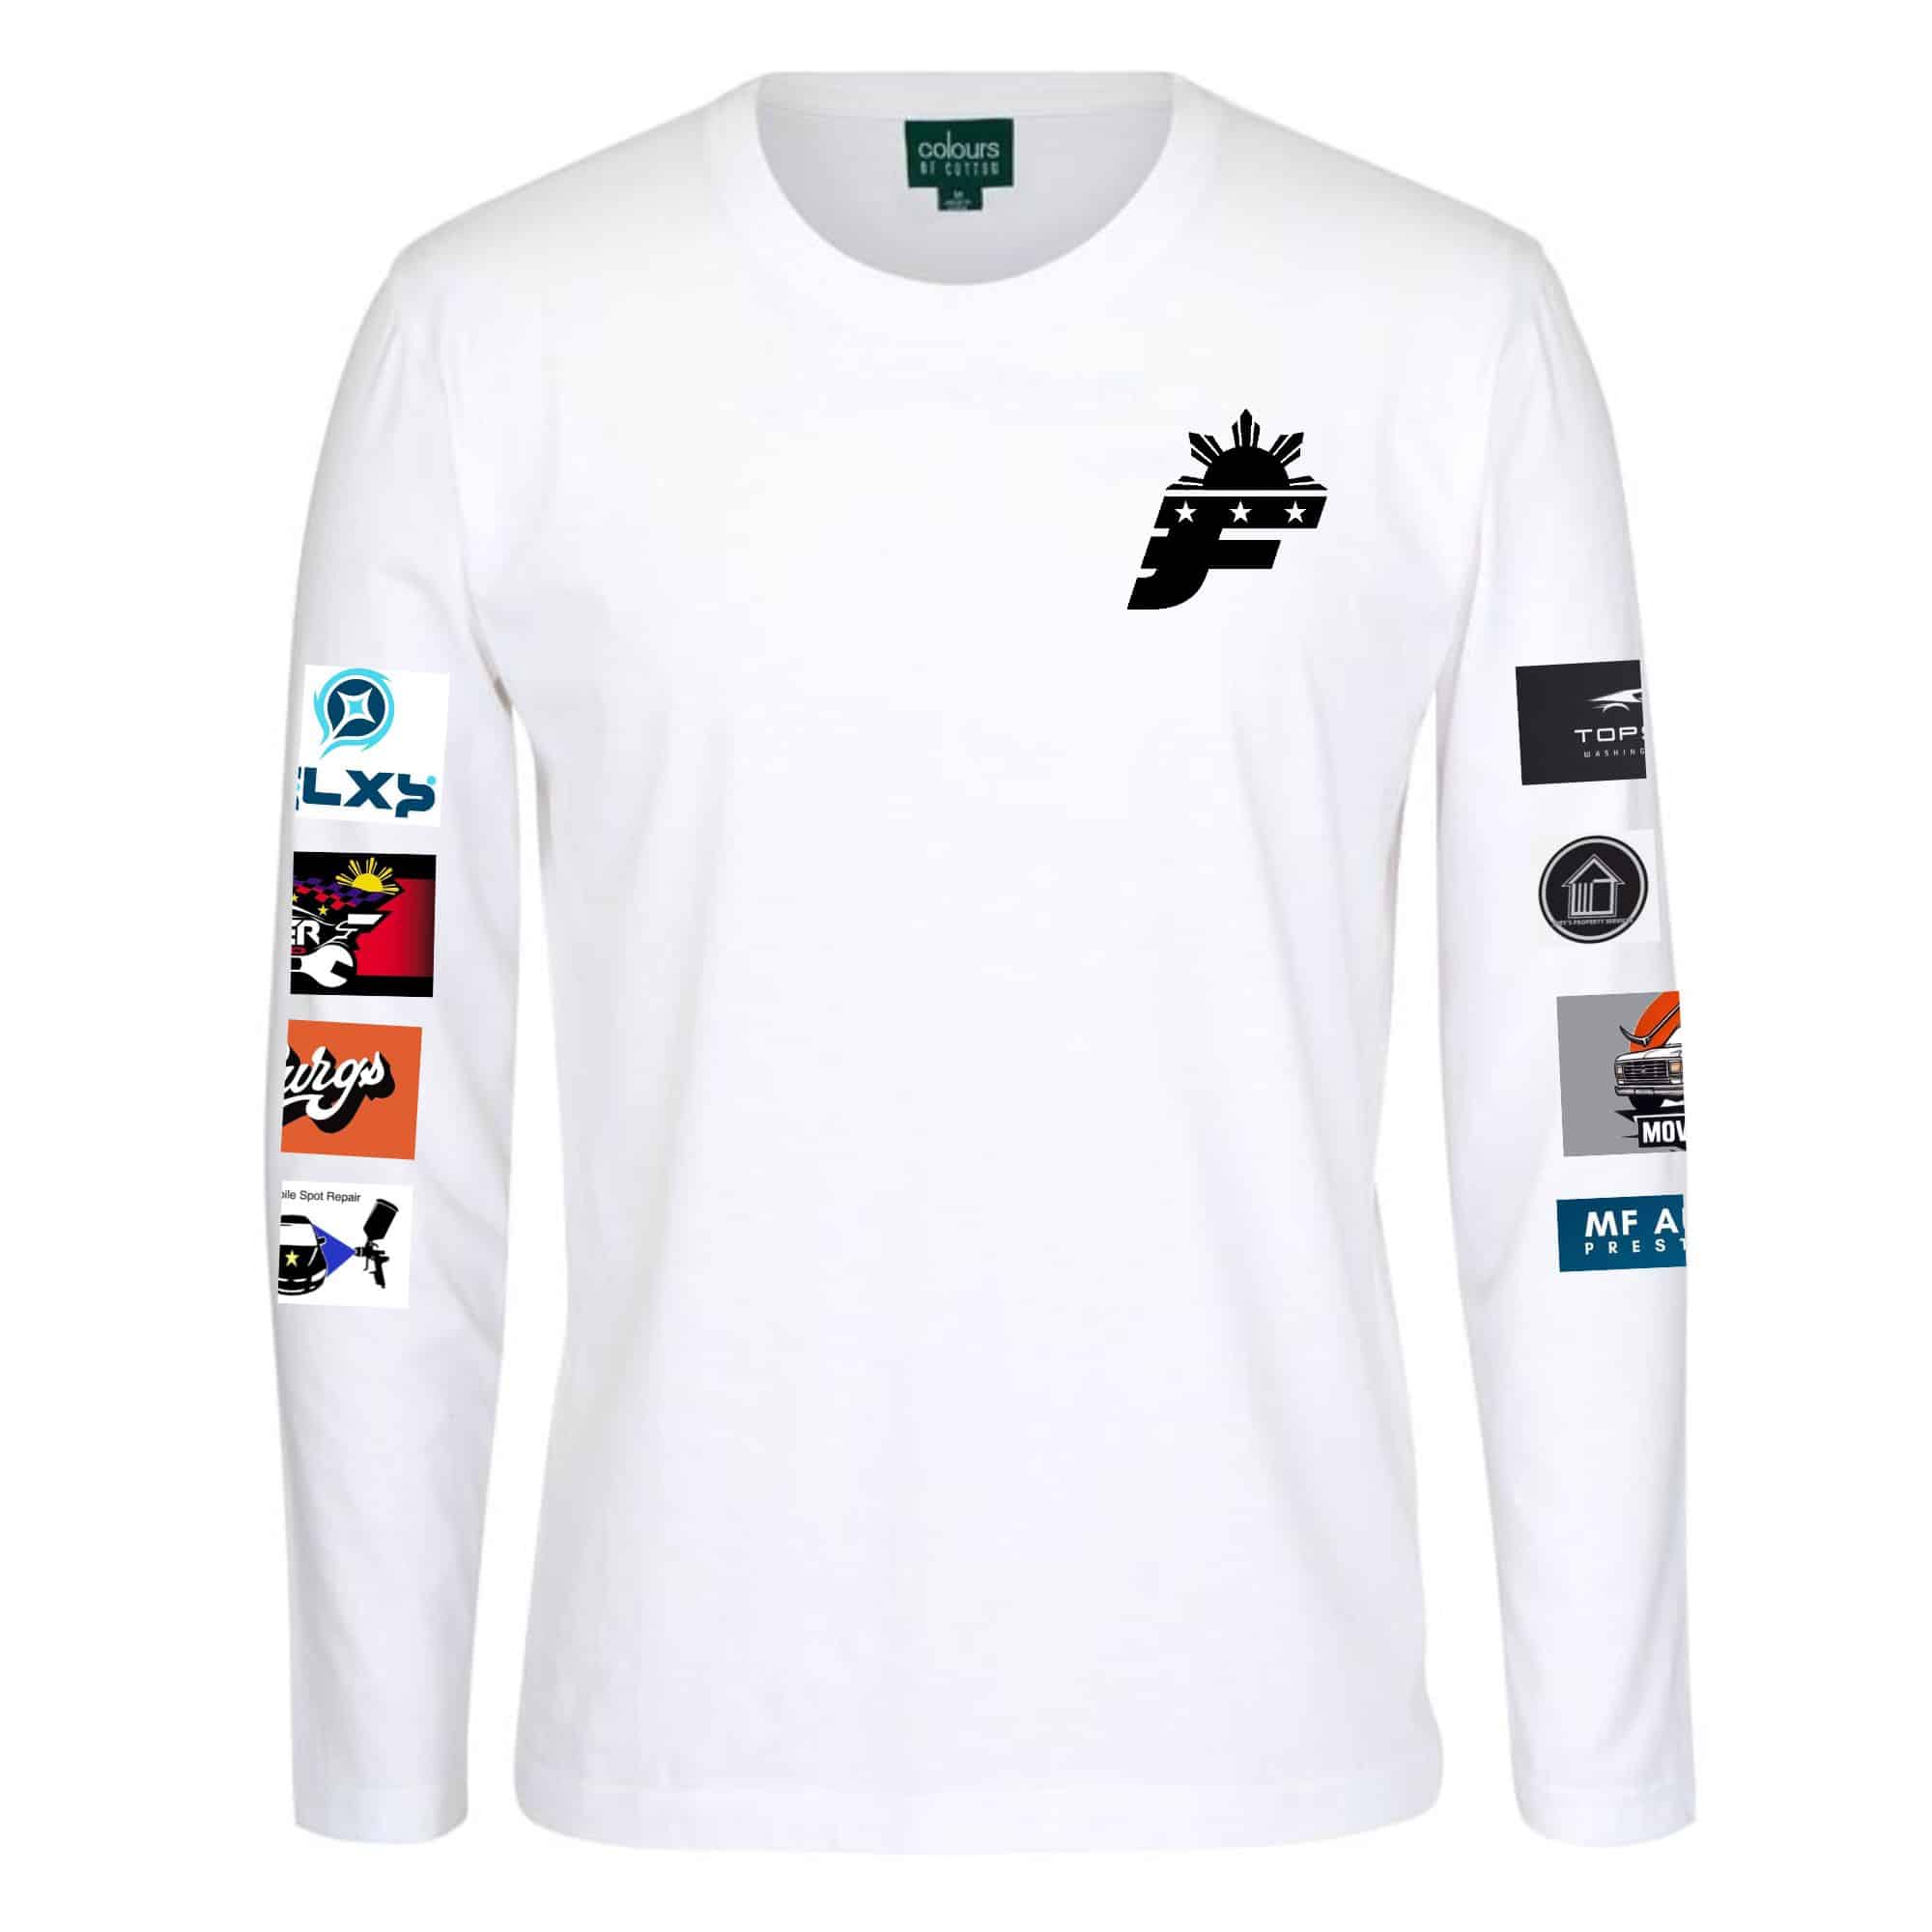 PINOY FIL CLUB-Long Sleeve-White-front